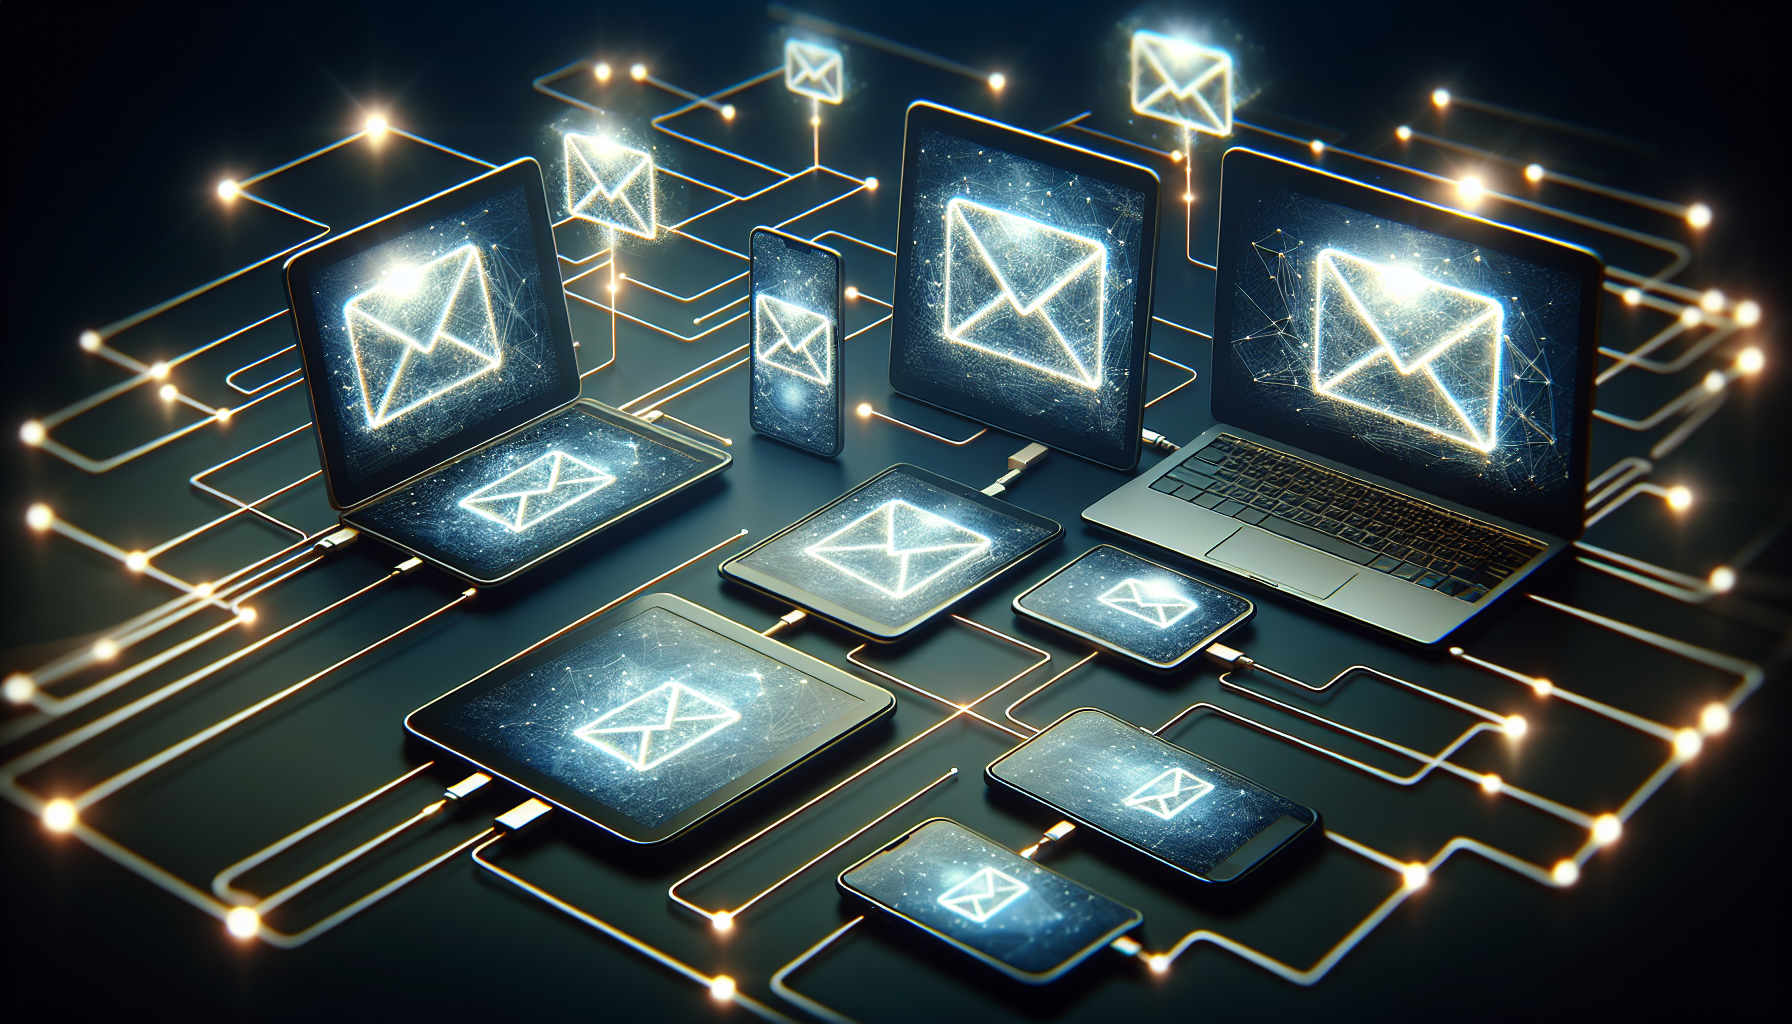 Illustration of multiple devices accessing email messages